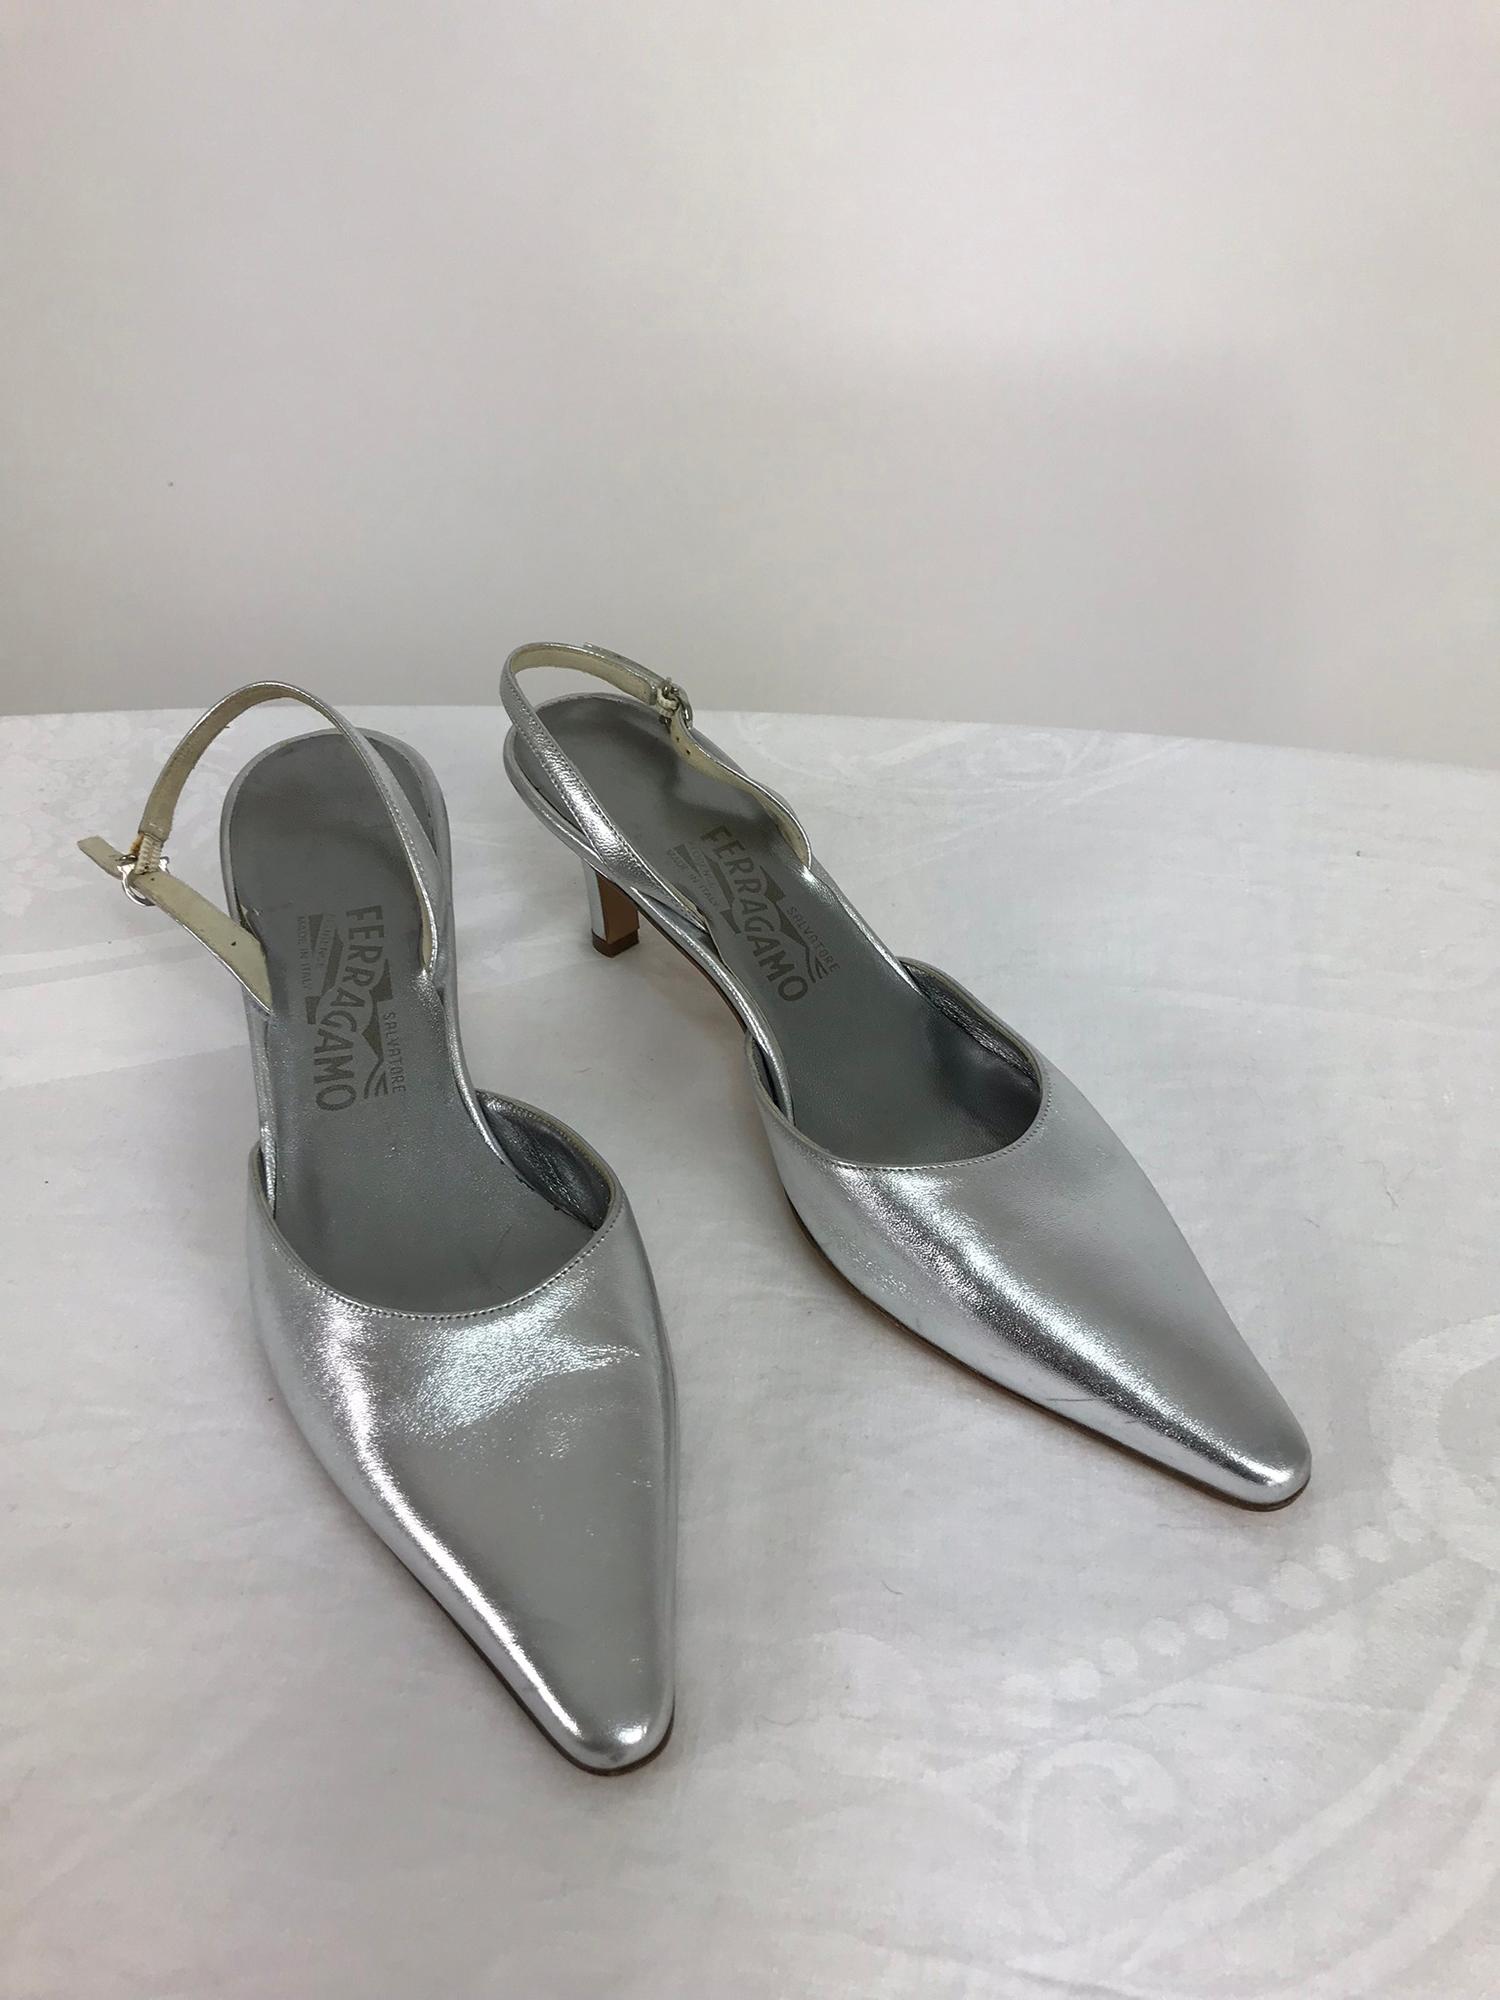 Salvatore Ferragamo silver leather sling back heels 8 1/2AA. Gorgeous silver lame leather, pointed toe, sling back pumps with 2 3/4 inch heels, adjustable strap buckle. Barely worn. 